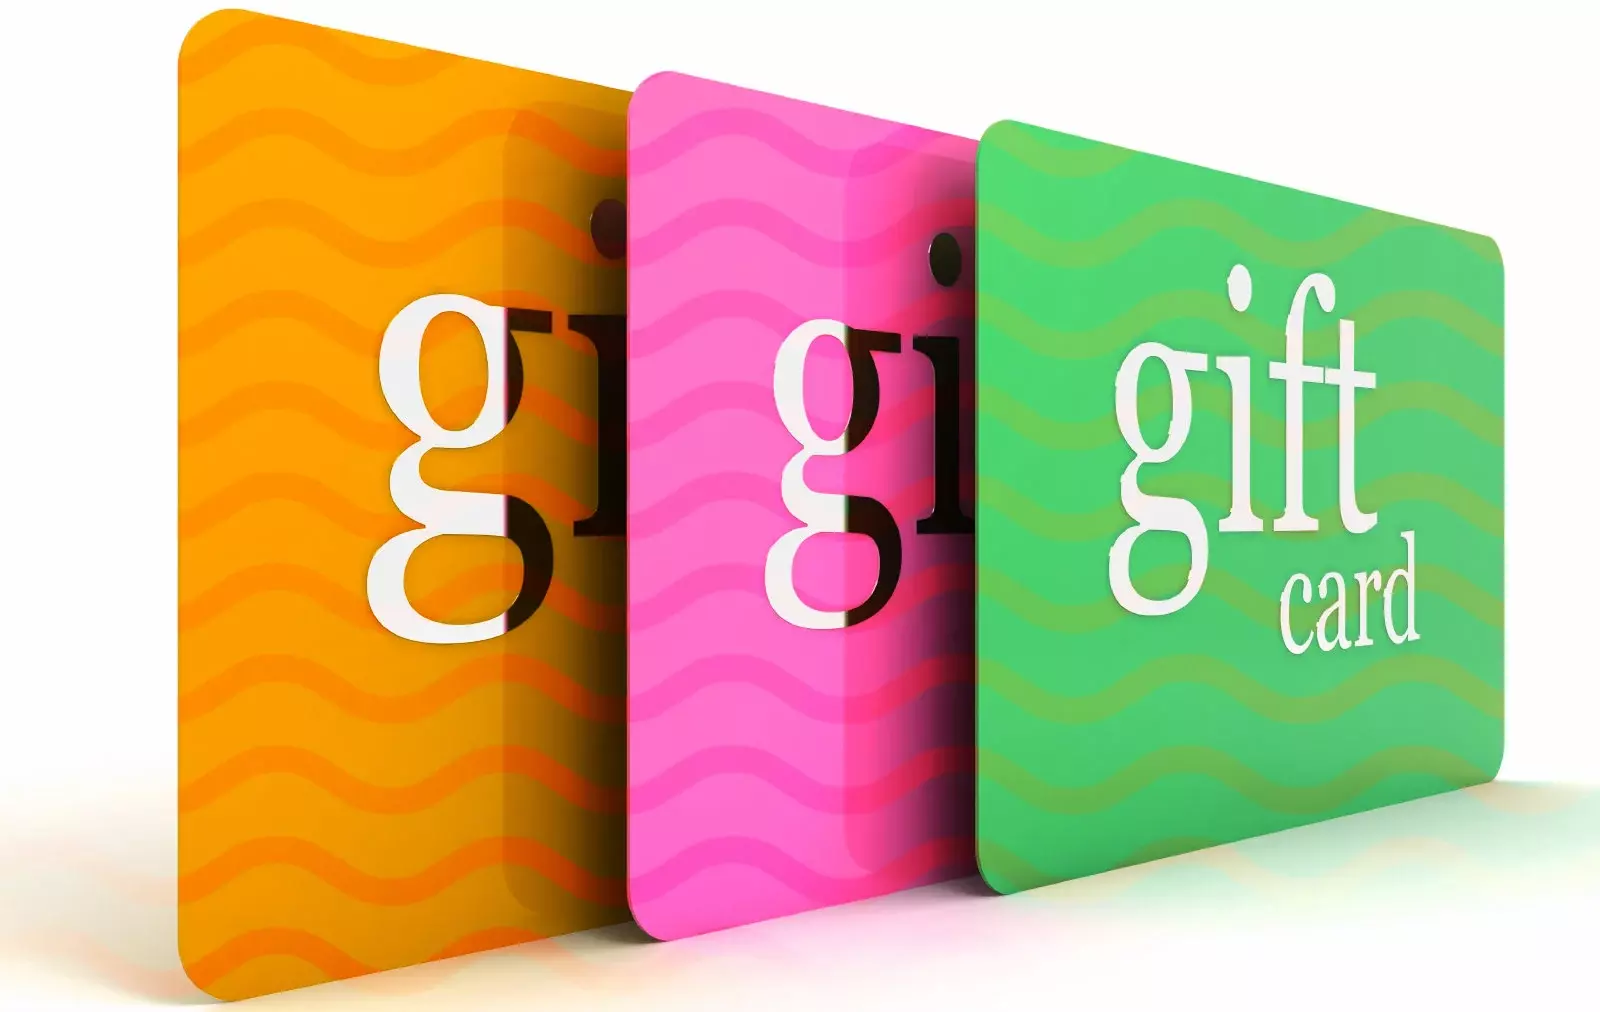 A GIFT CARD IS A GREAT PRESENT FOR ANY OCCASION